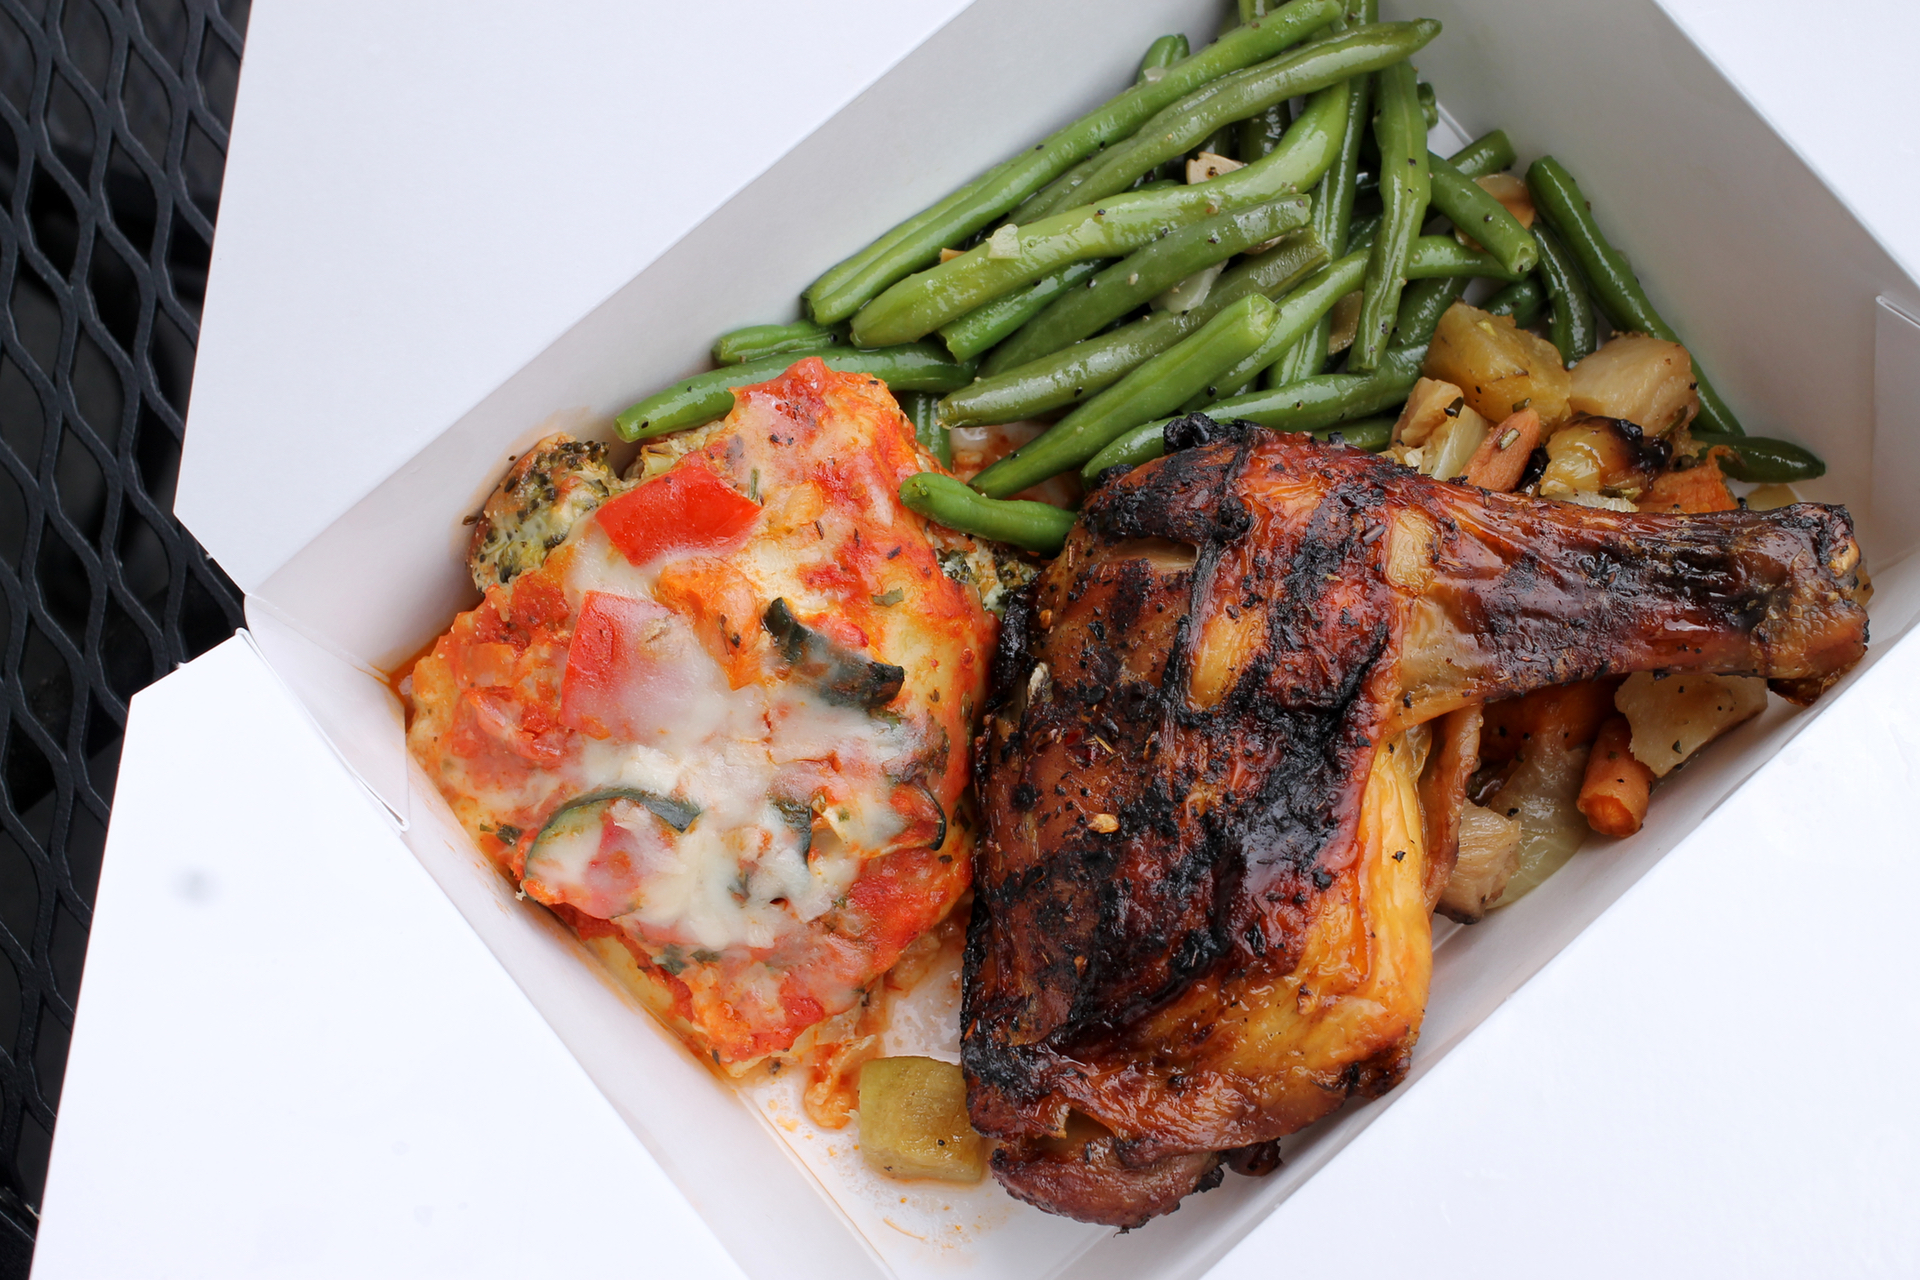 Vegetable lasagna, green beans almondine, roasted root vegetables, and jerk chicken from Piedmont Grocery.